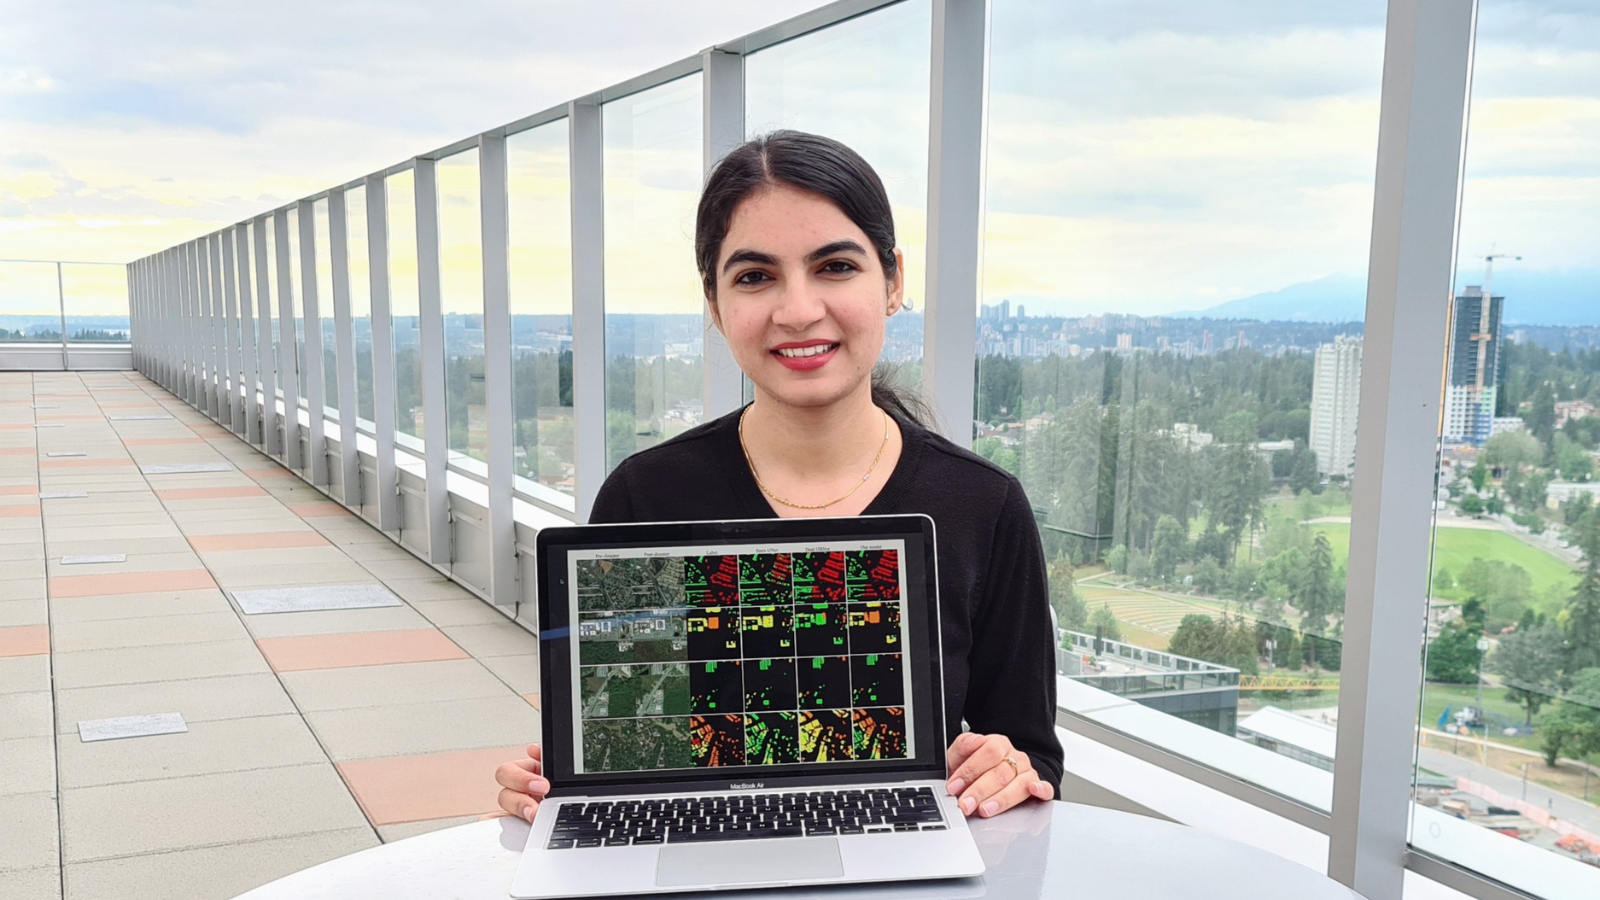 SFU Computing Science Student's Work on Large-Scale Building Damage Assessment Published in Notable Journal